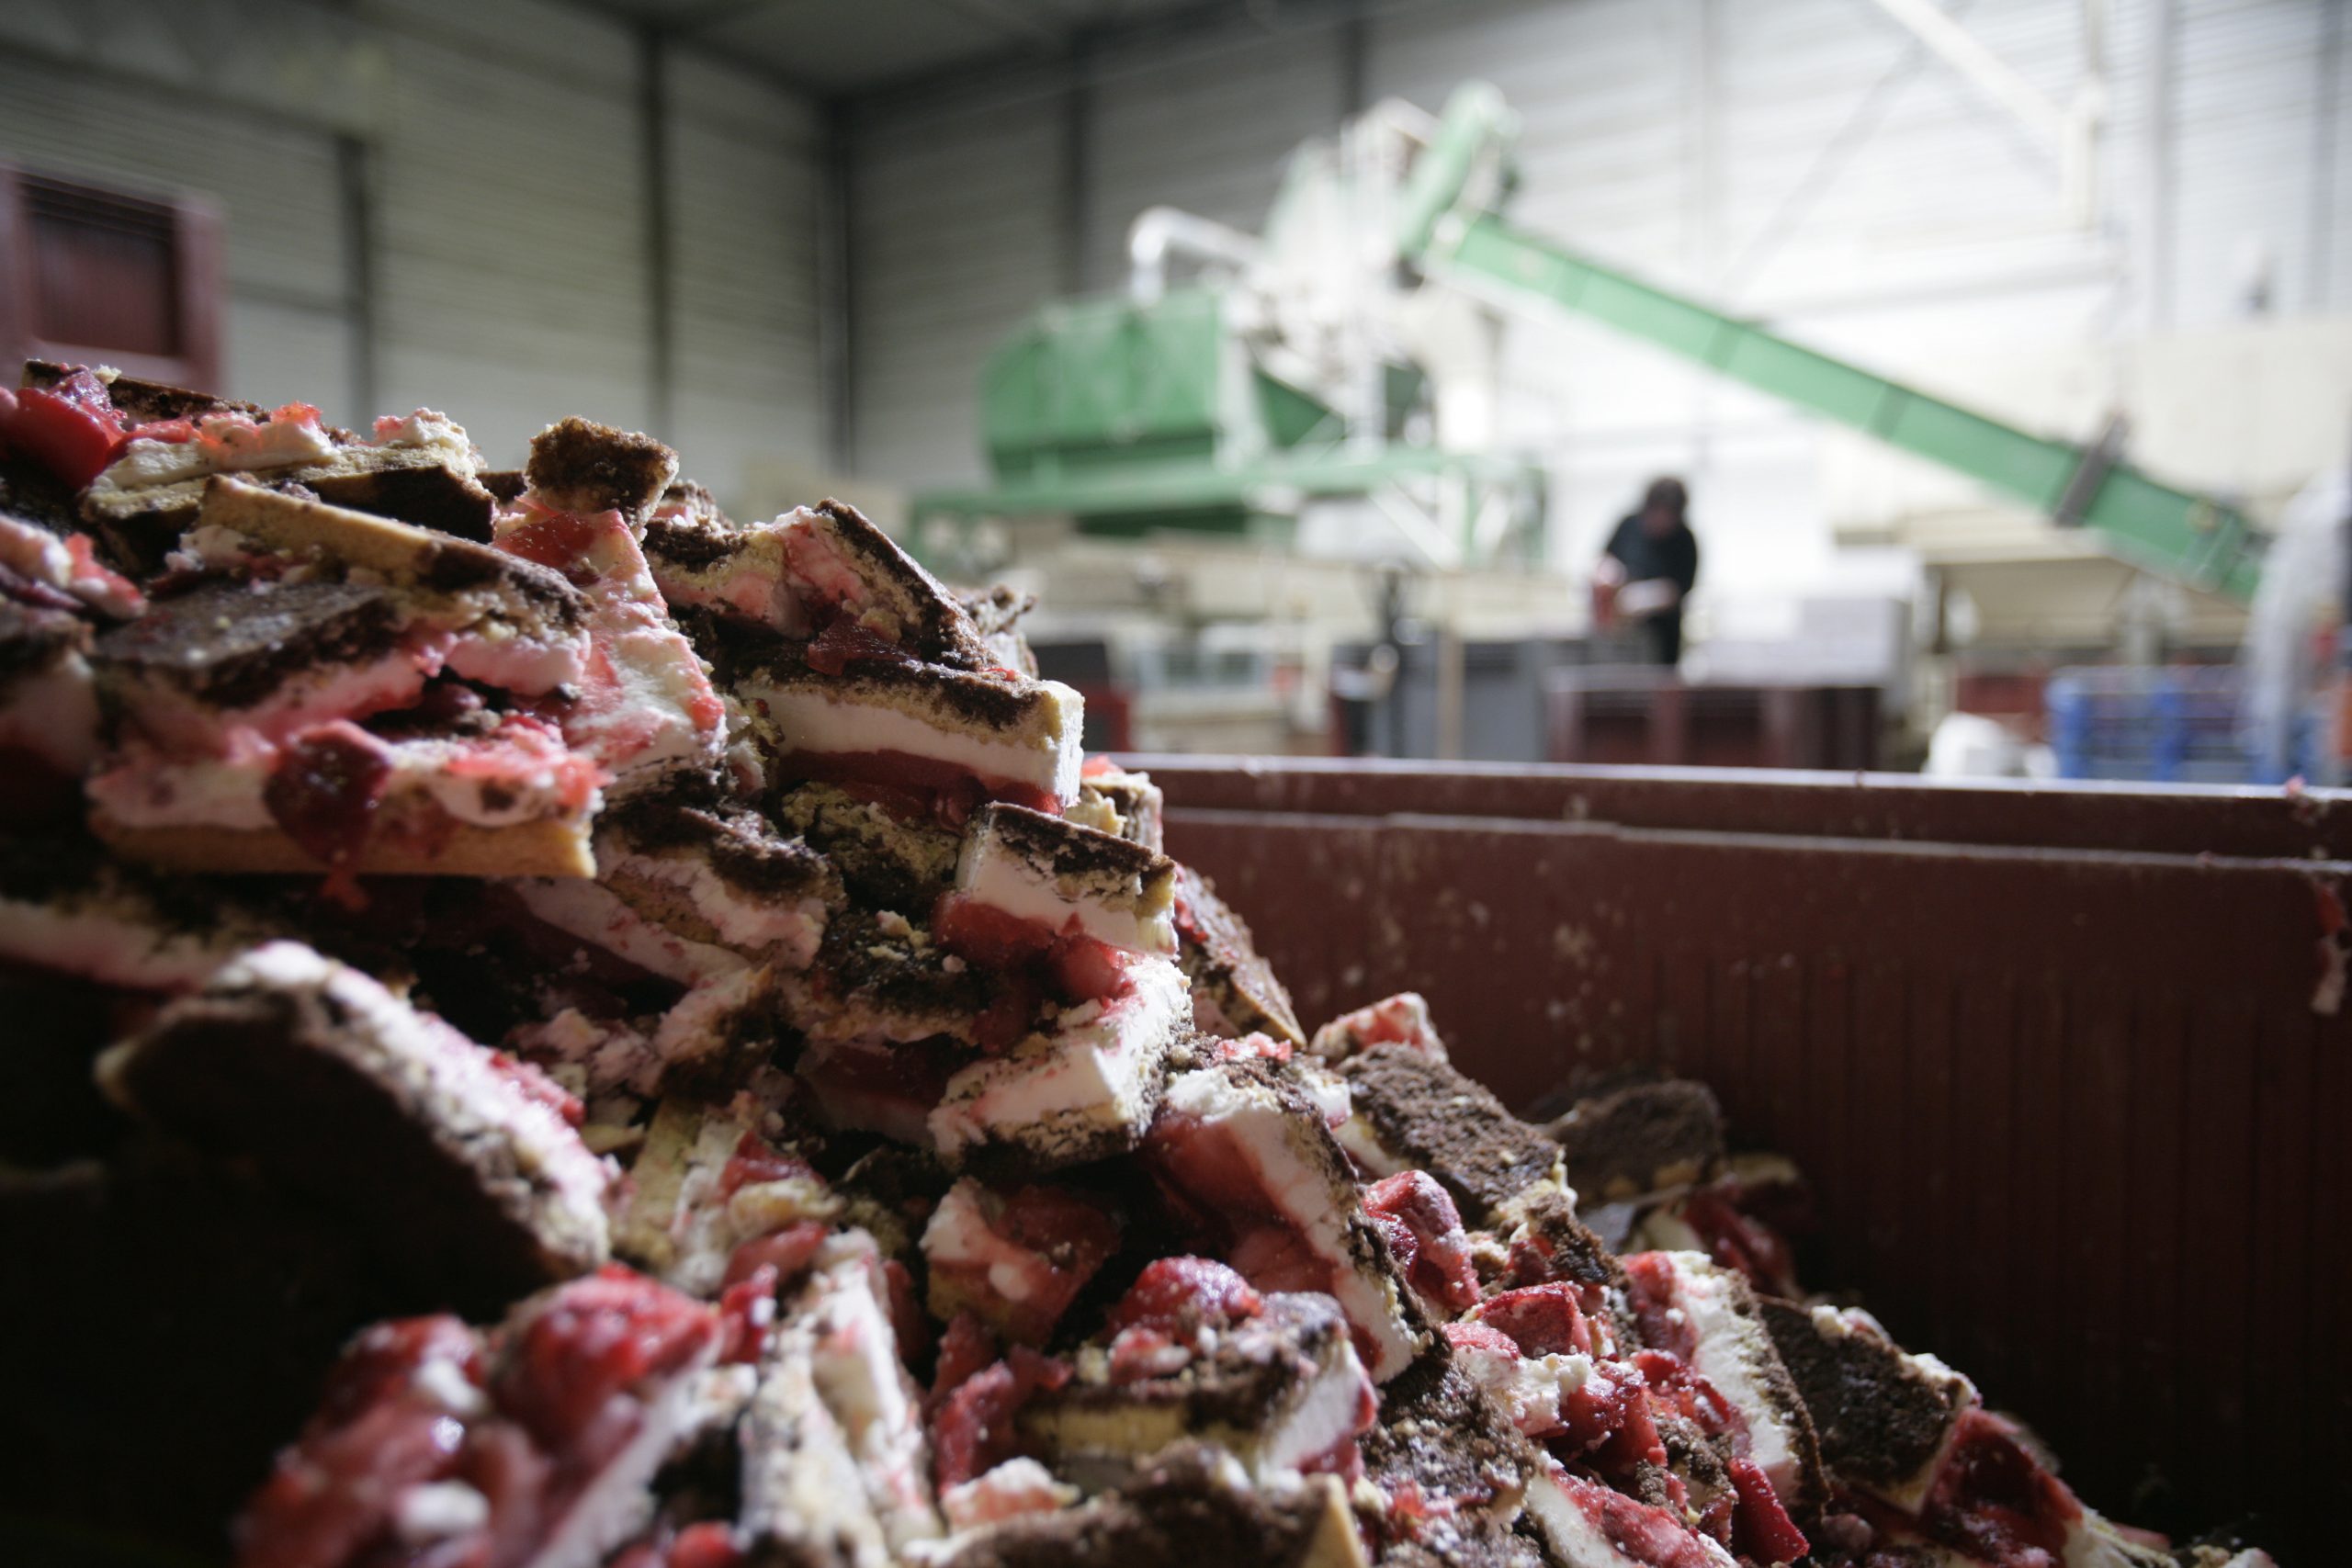 The challenge of using food losses for feed. Photo: Jan Willem Schouten